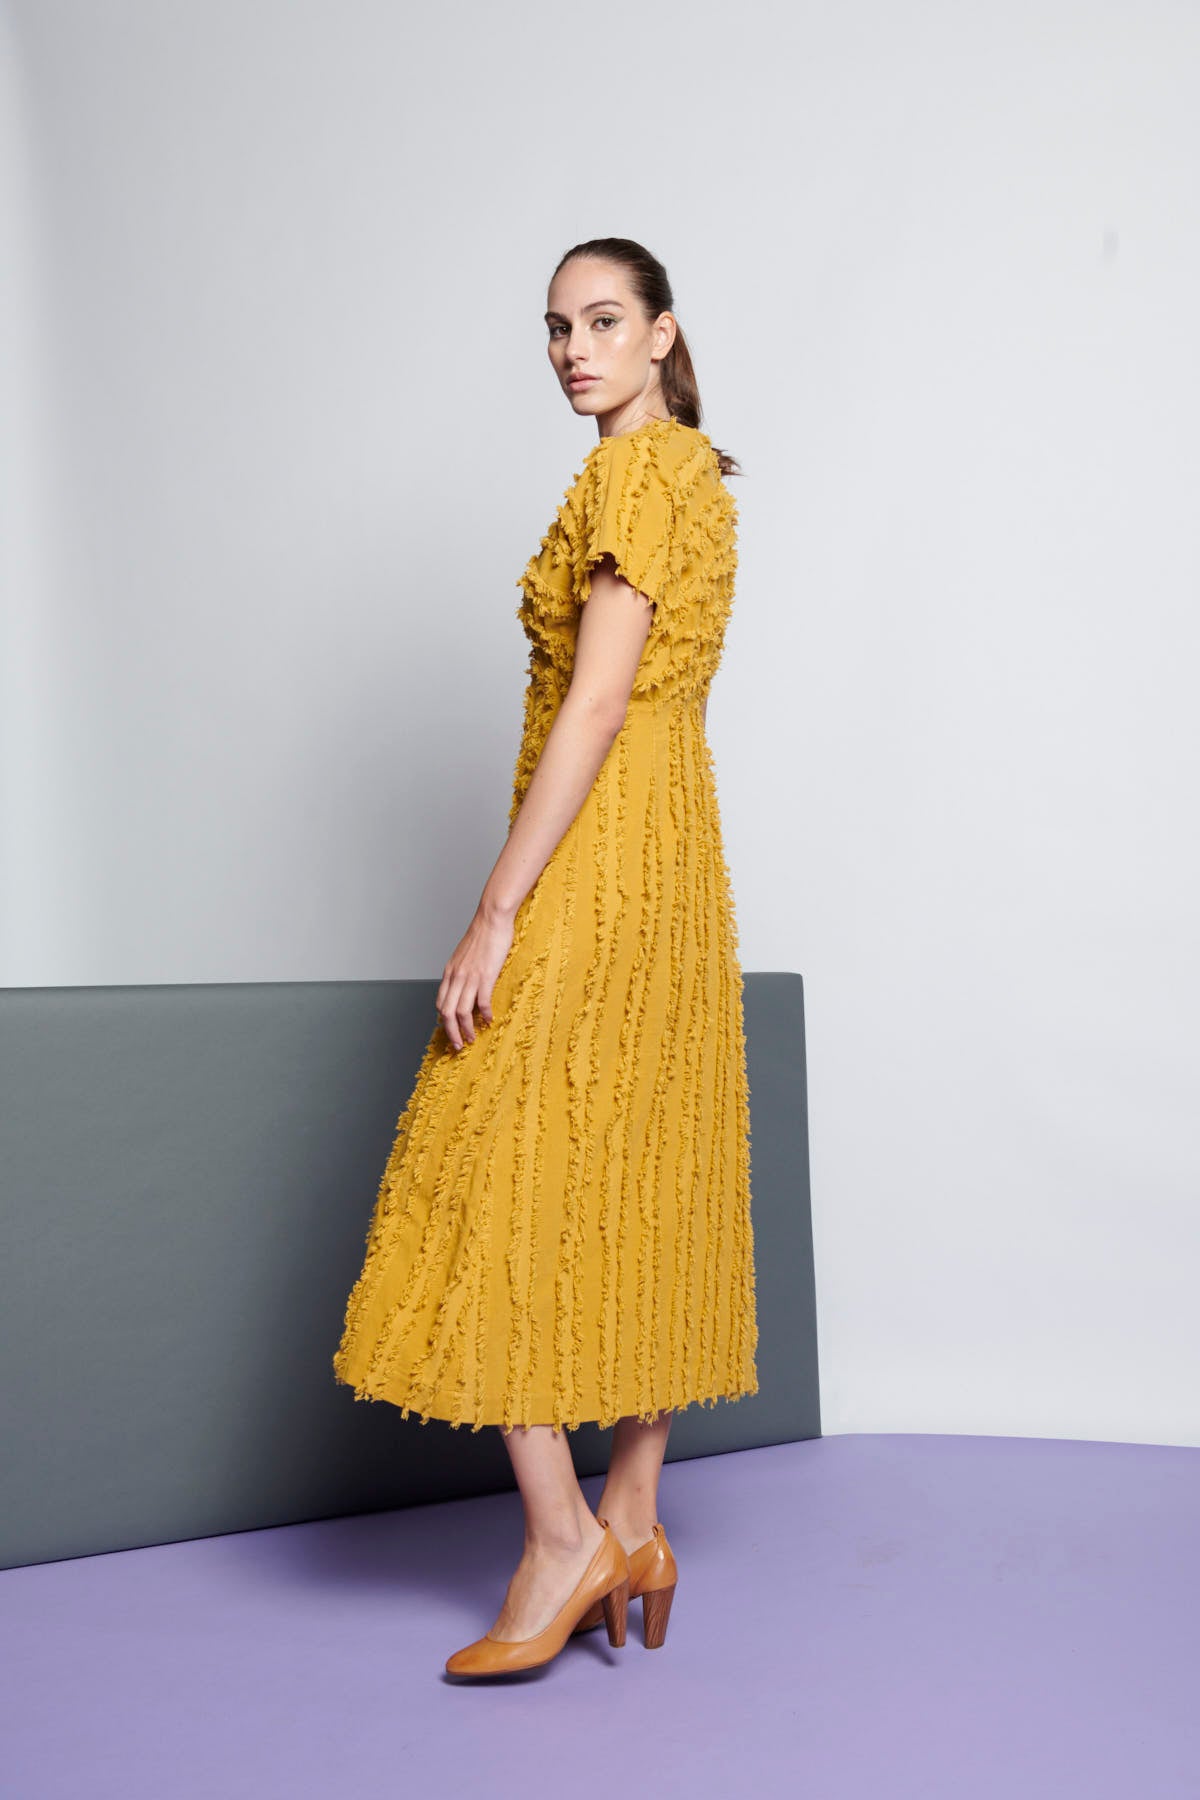 A yellow cotton empire-cut and midi-length dress with V-neckline, short sleeves, and stripe fringe texture.